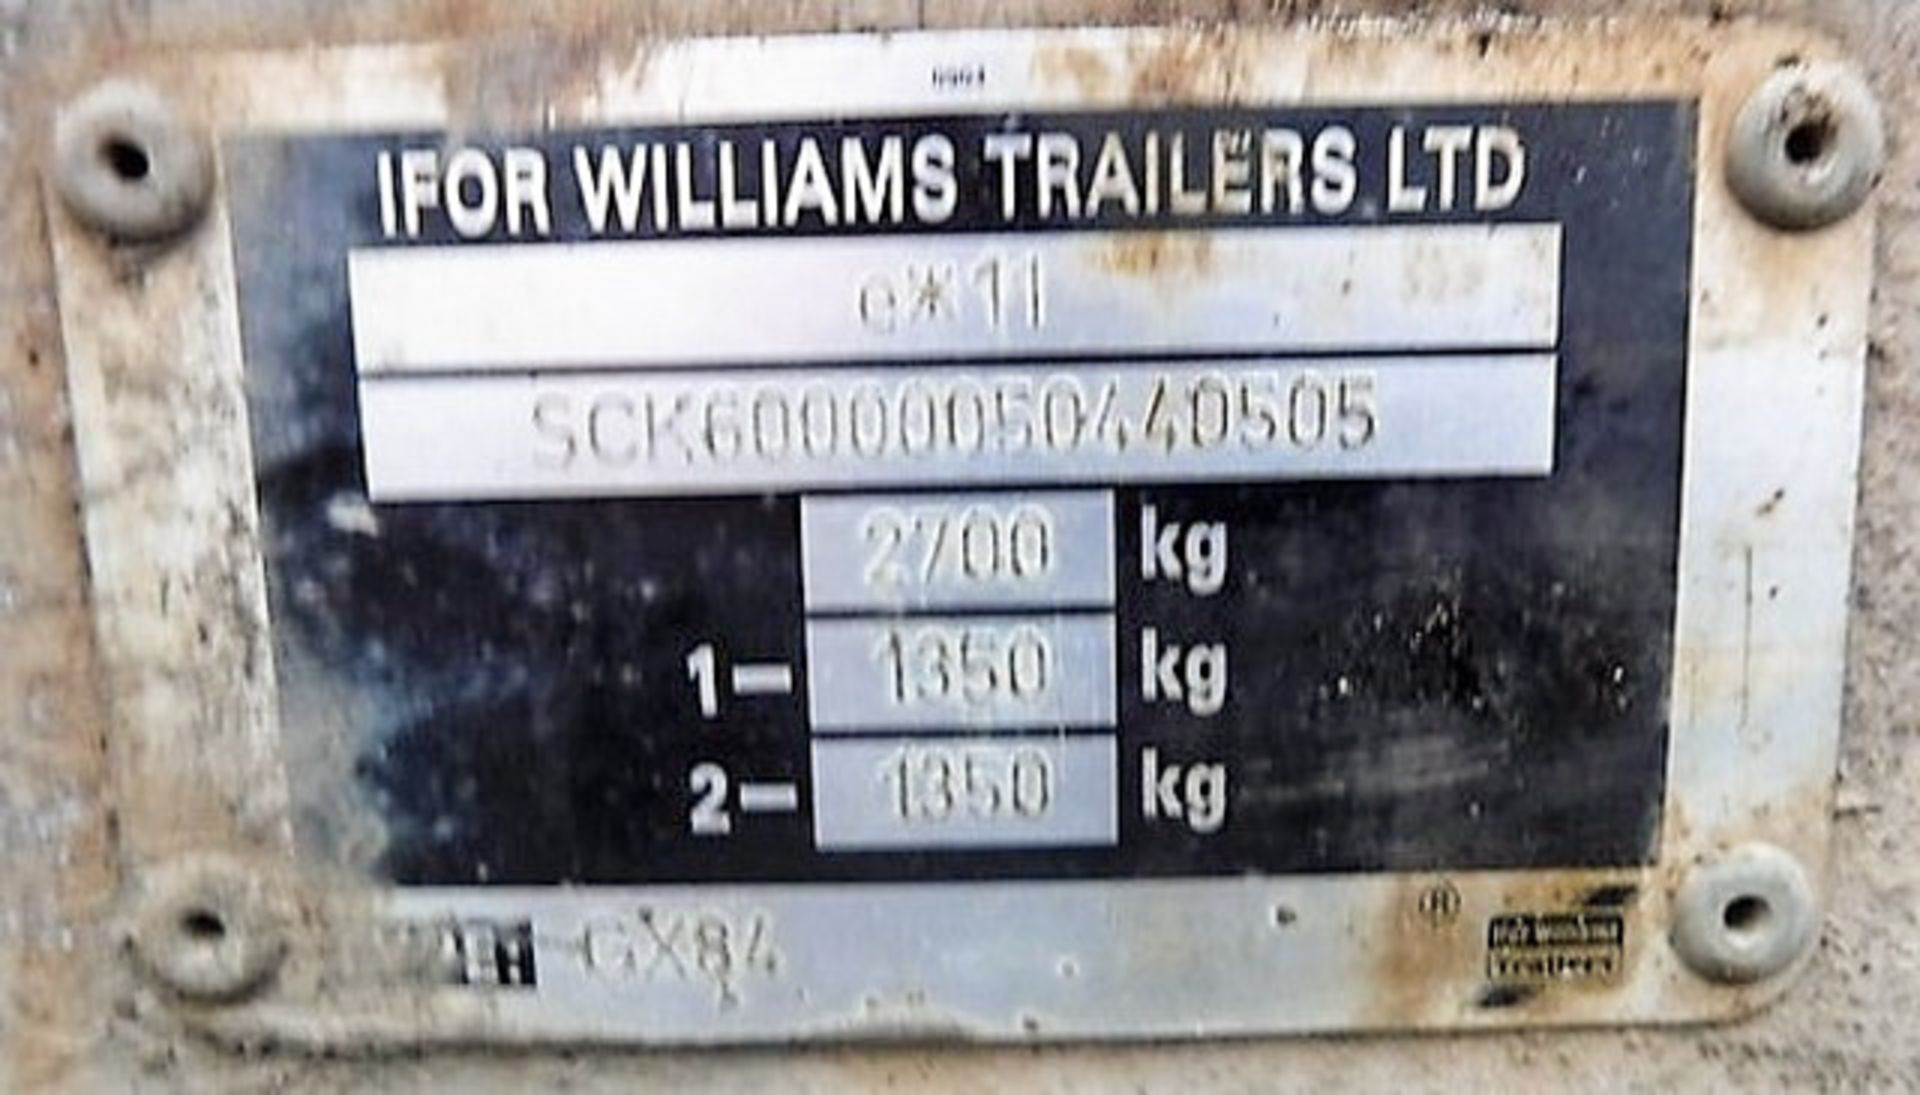 IFOR WILLIAMS TWIN AXLE PLANT TRAILER, S/NSCK60000050440505 - Image 4 of 4